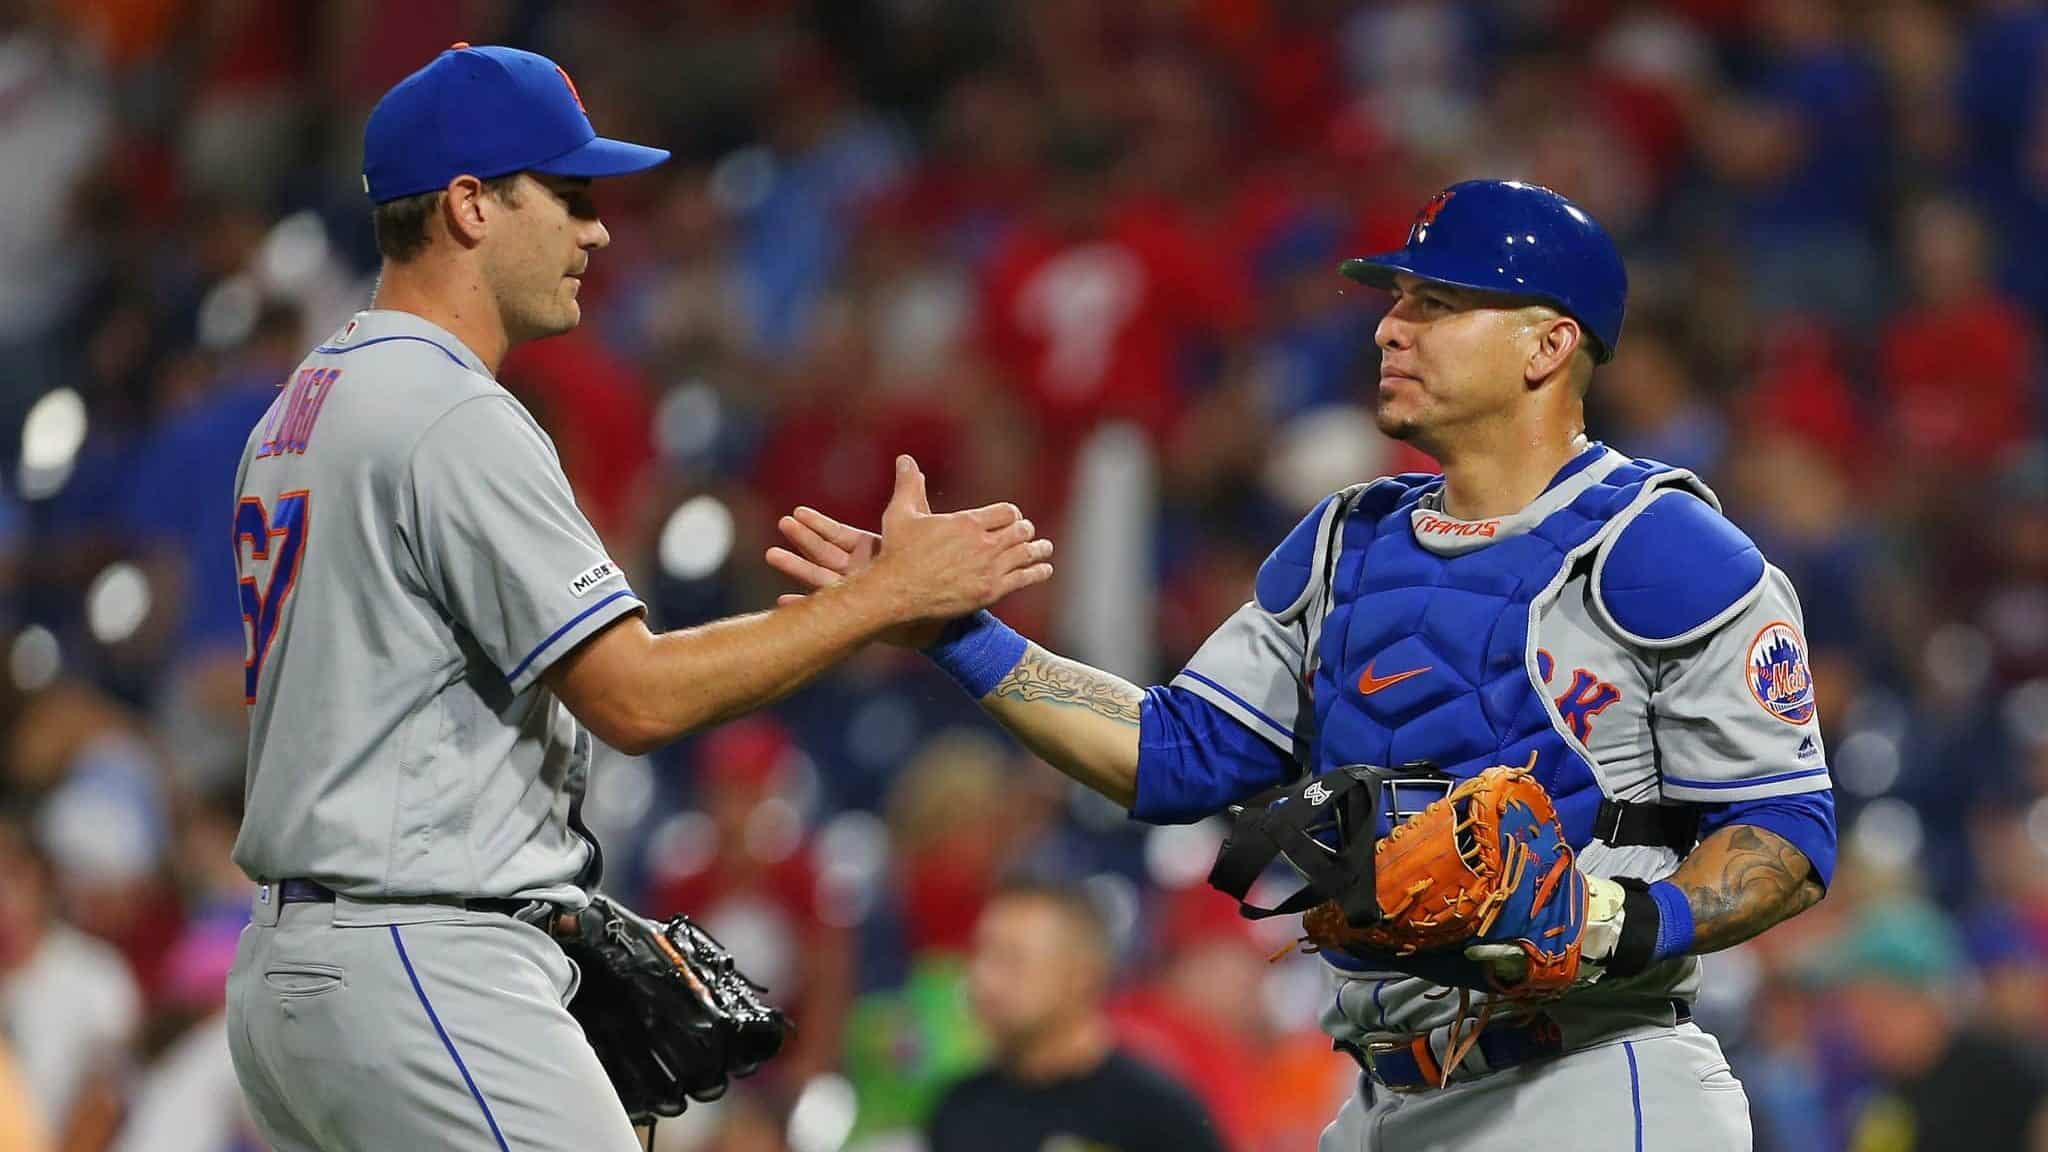 PHILADELPHIA, PA - AUGUST 31: Closer Seth Lugo #67 is congratulated by catcher Wilson Ramos #40 after defeating the Philadelphia Phillies 6-3 in a game at Citizens Bank Park on August 31, 2019 in Philadelphia, Pennsylvania.